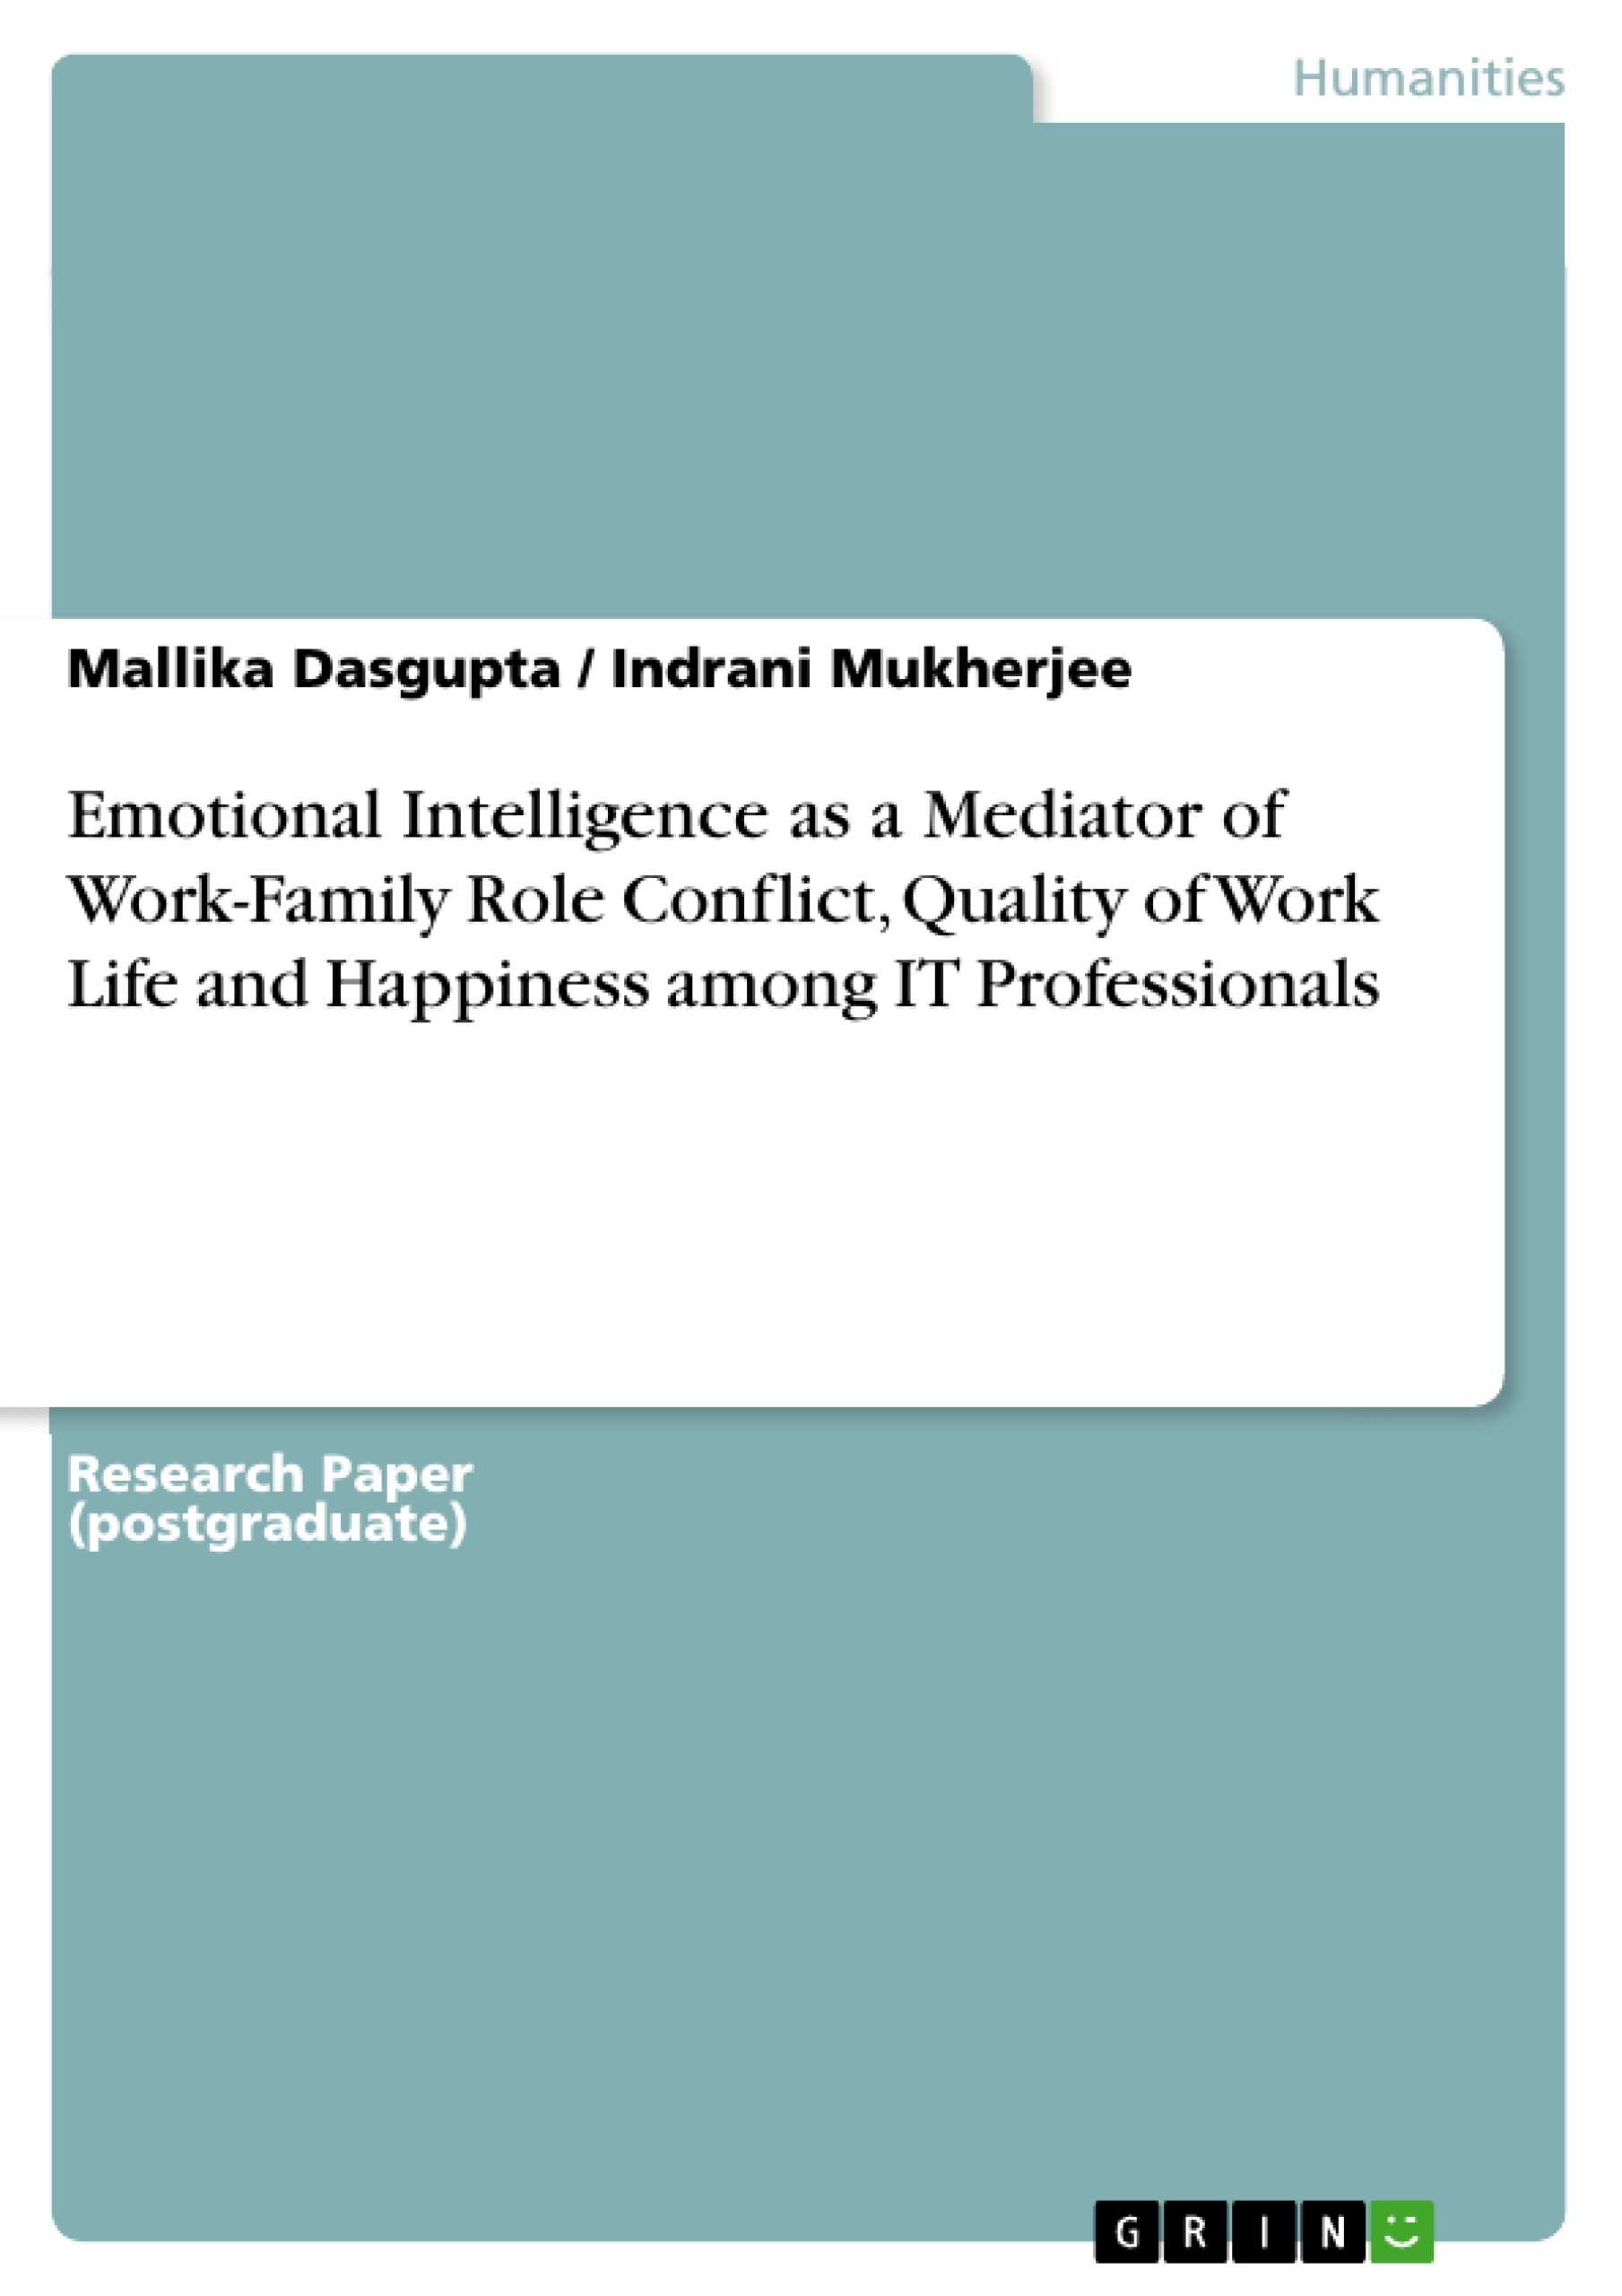 Title: Emotional Intelligence as a Mediator of Work-Family Role Conflict, Quality of Work Life and Happiness among IT Professionals